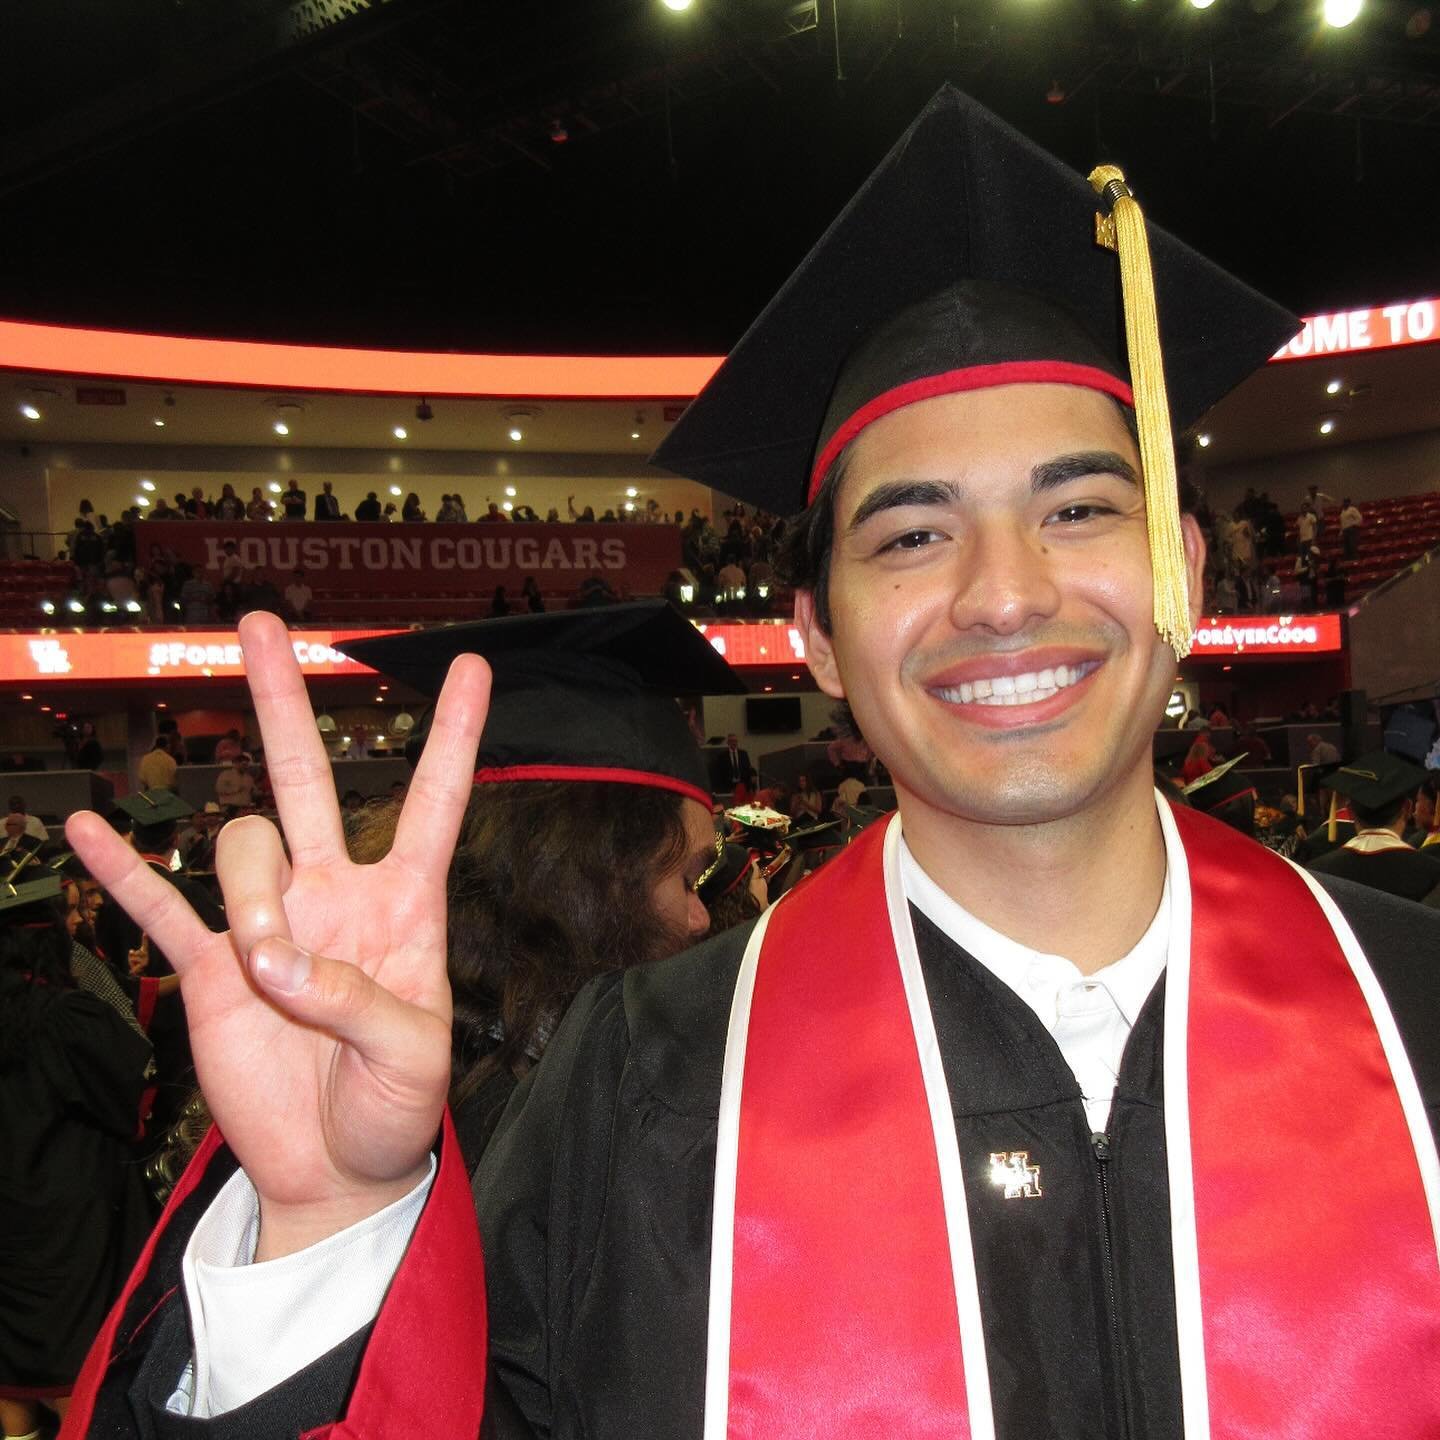 This past Friday at @UniversityOfHouston Commencement, two of our district staffers graduated. Please join me in not only congratulating Manuel Solis and Isabella Porras on this incredible achievement, but for the incredible work they have done for #